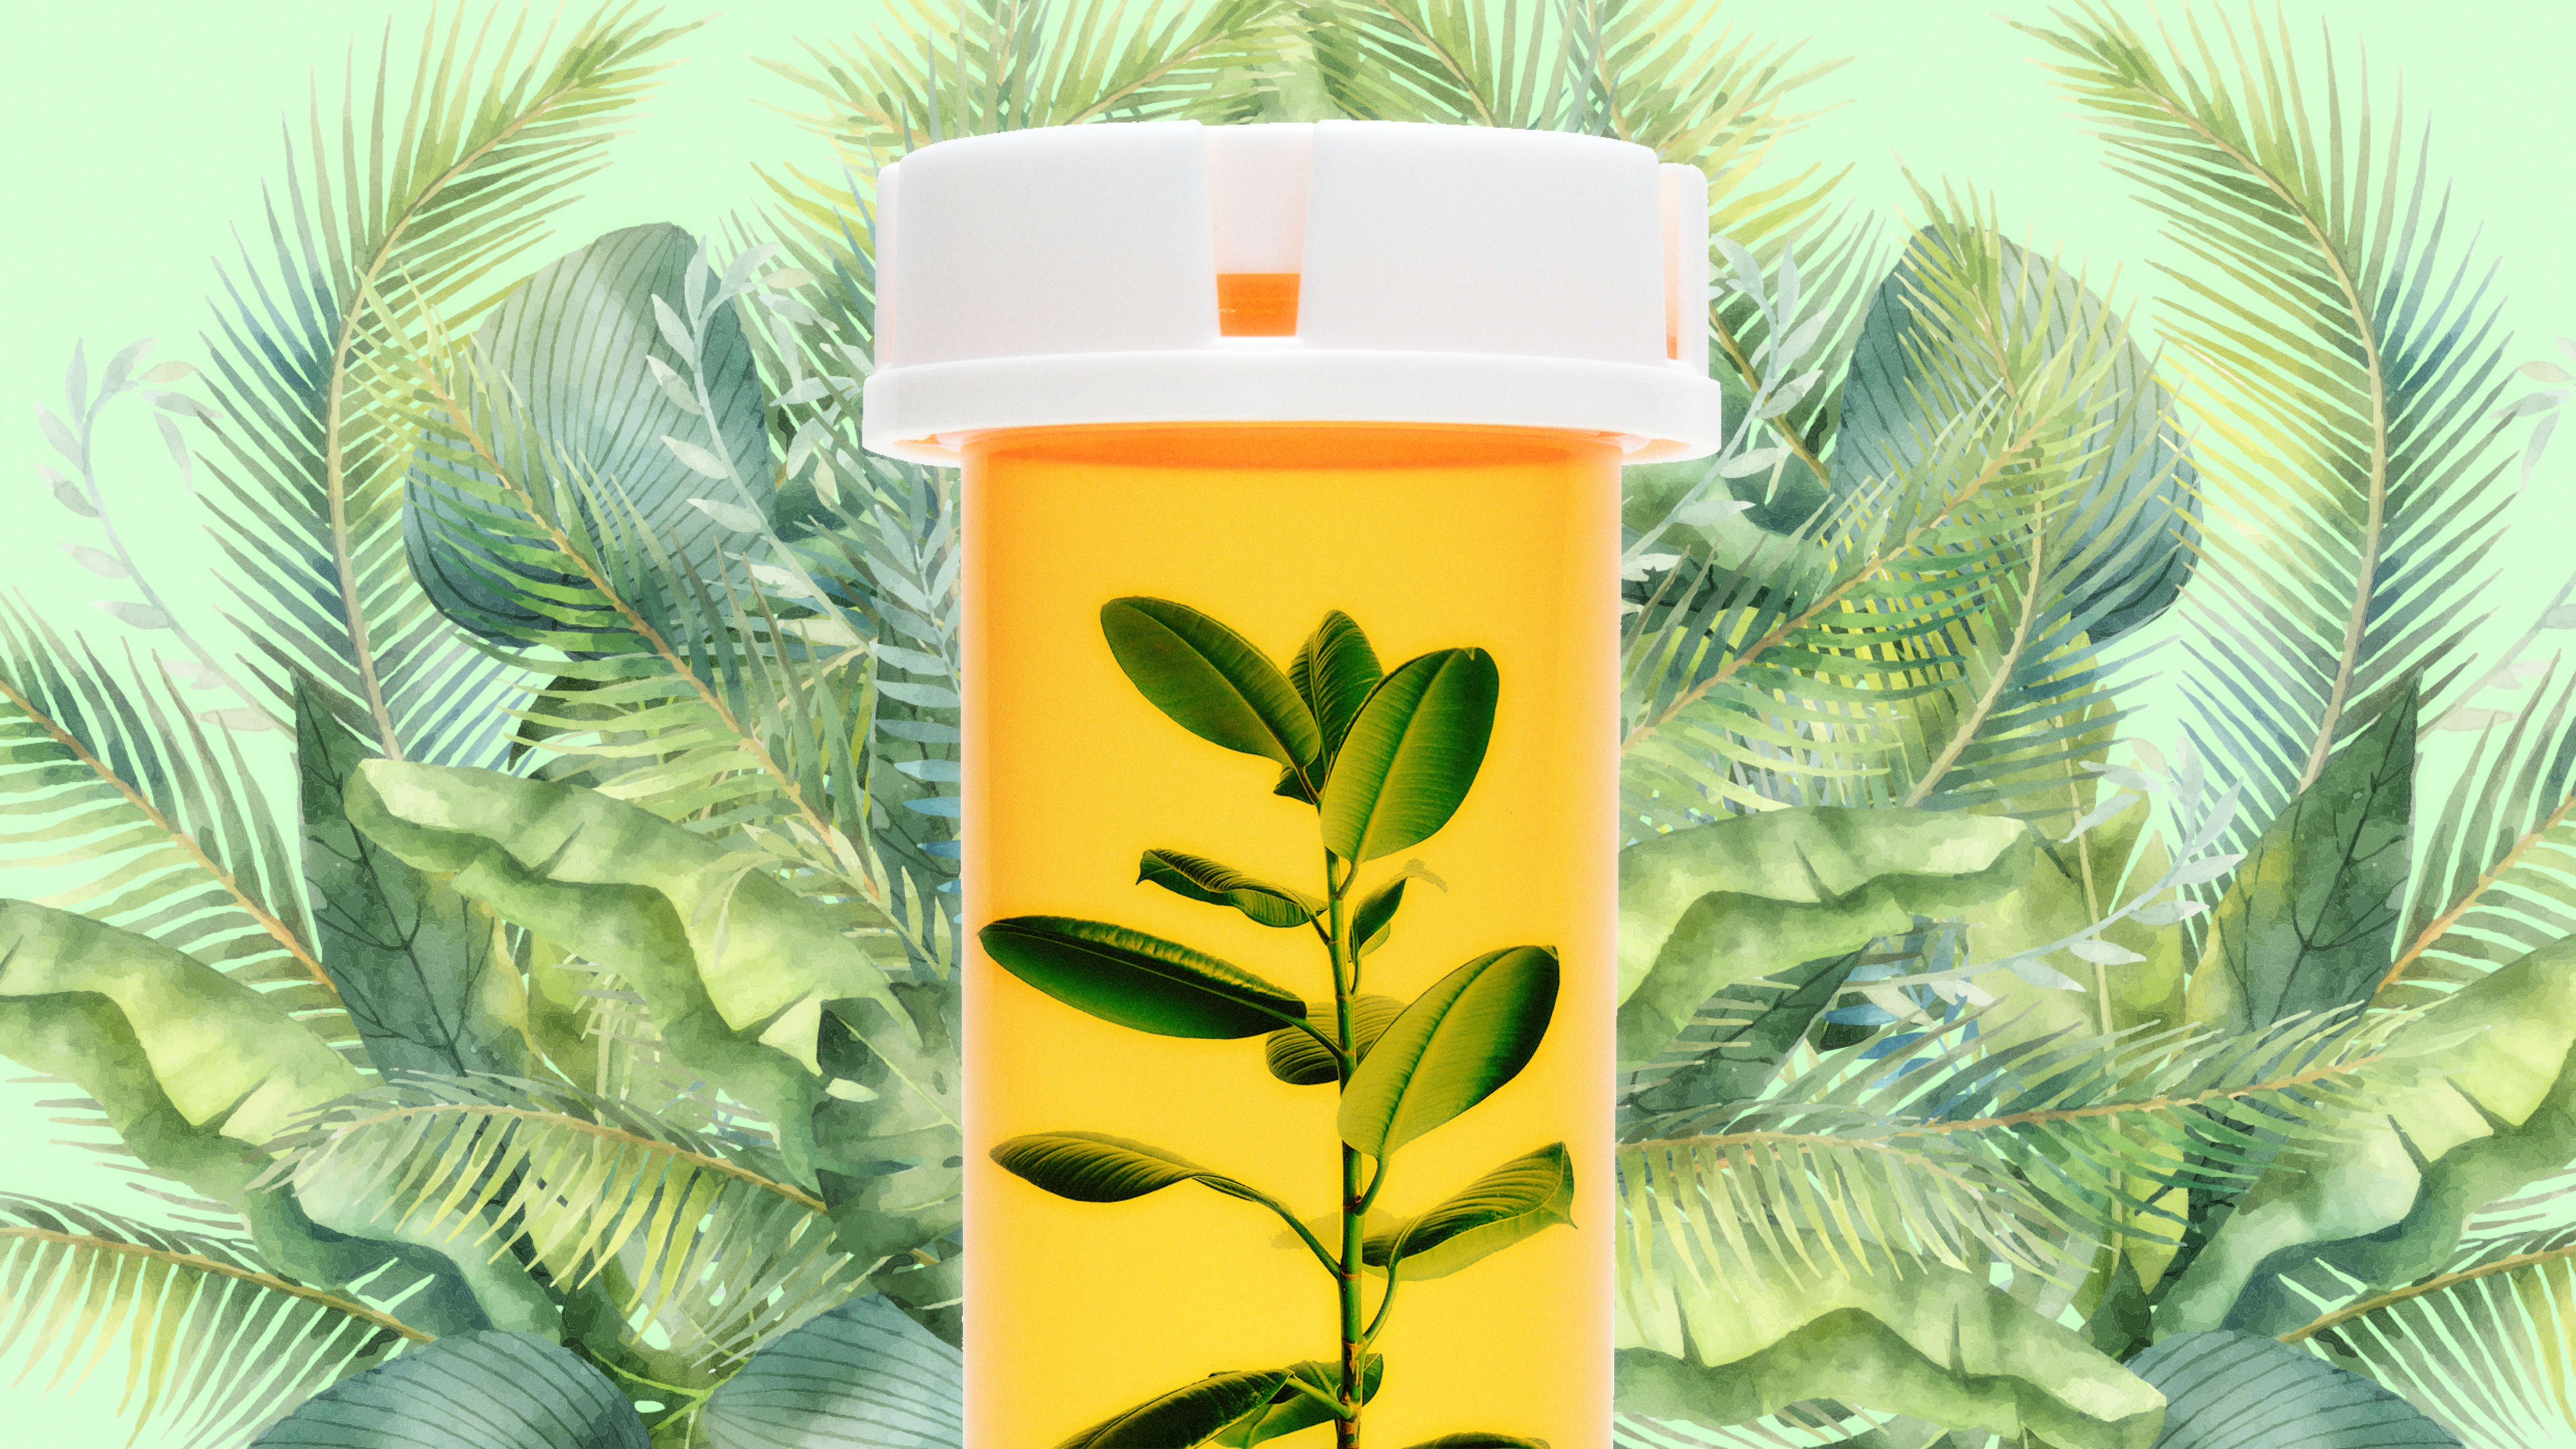 Doctors are now prescribing houseplants to help treat anxiety and depression